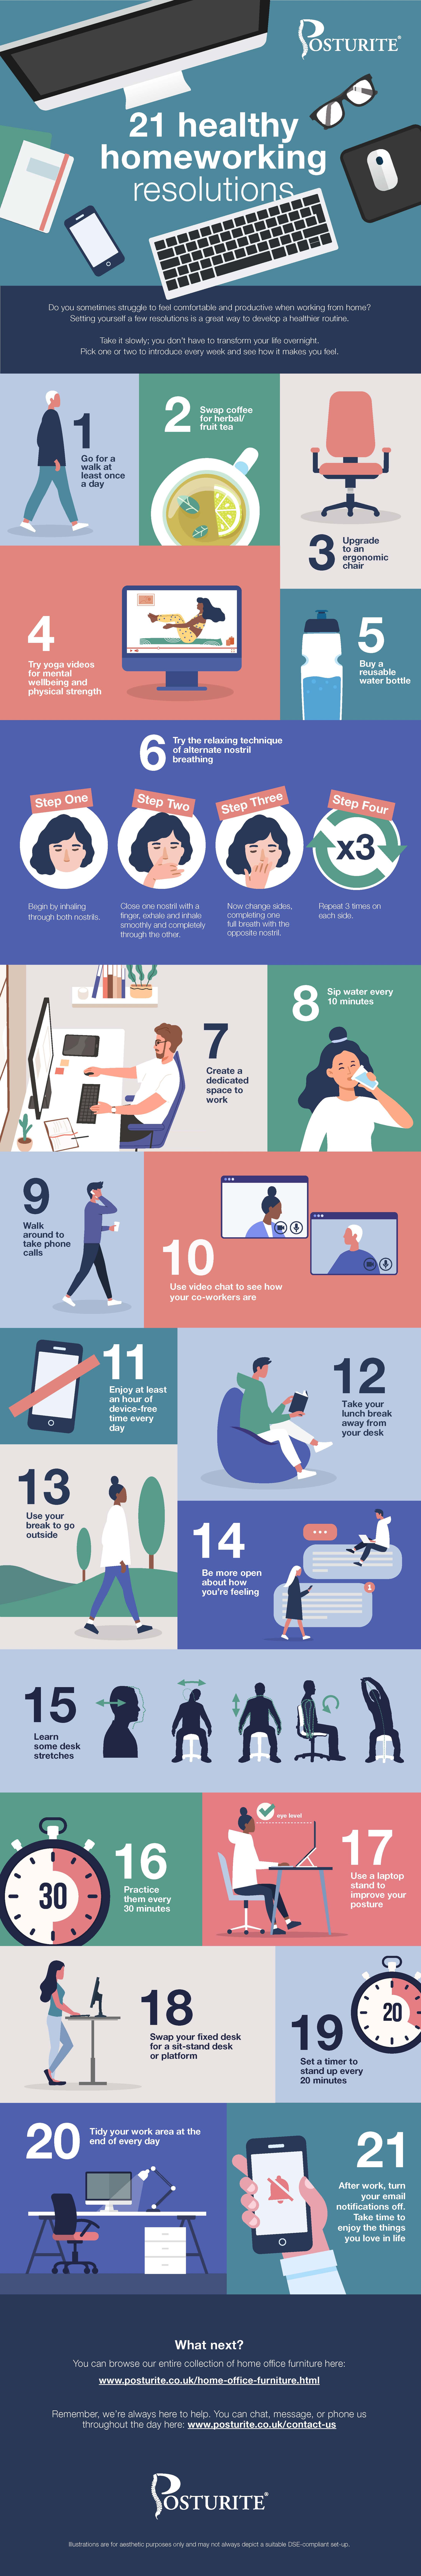 An infographic depicting 21 ideas for how to be healthier in 2021